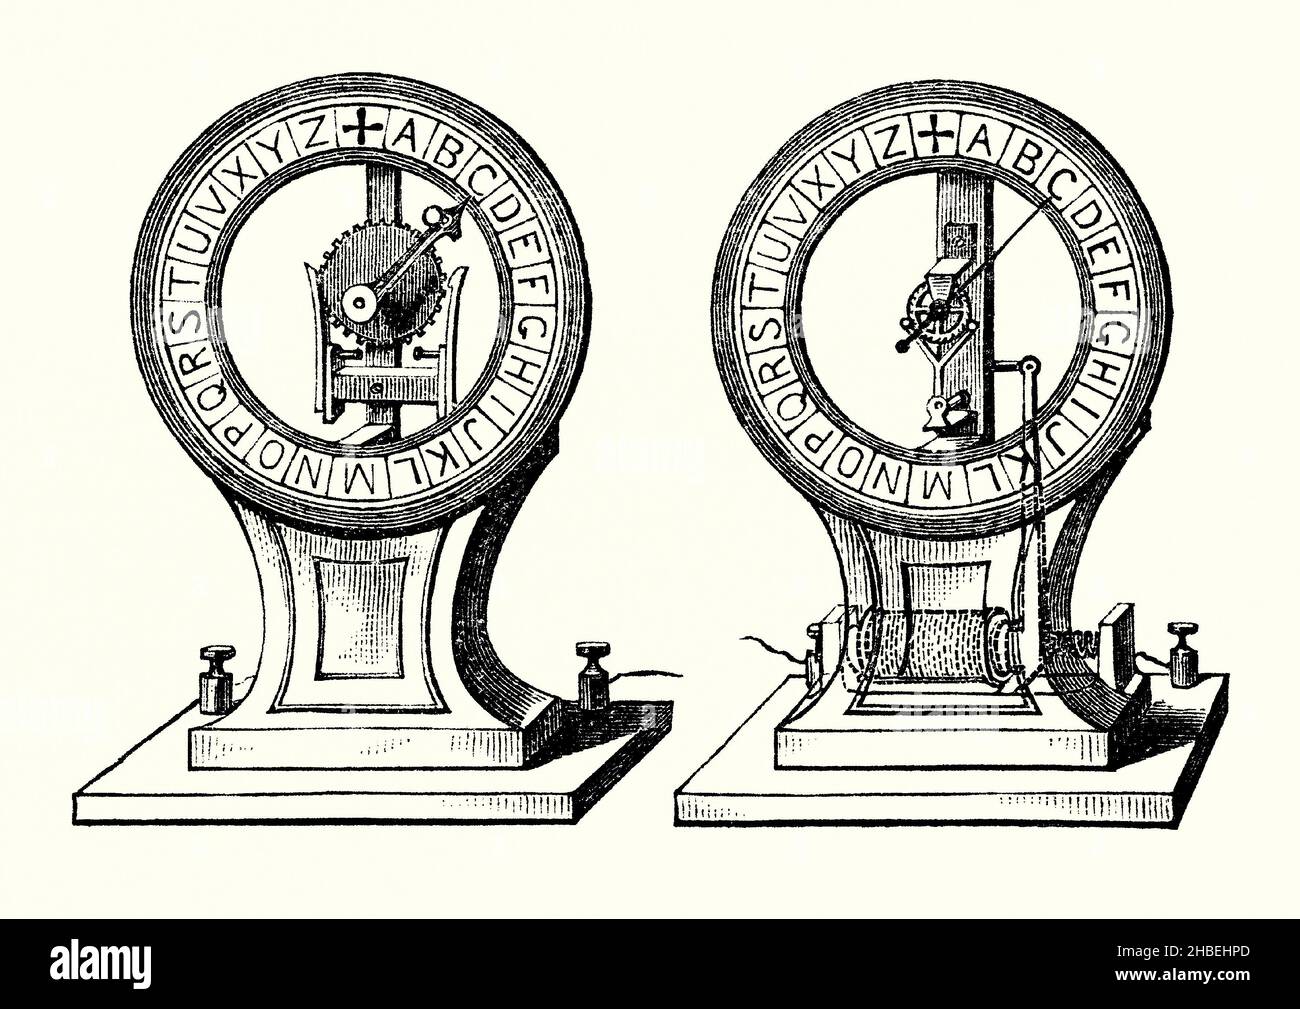 An old engraving of Gustave Froment’s alphabetical telegraph dials of 1850. It is from a book of the 1890s on discoveries and inventions during the 1800s. Paul Gustave Alexandre Froment (1815–1865) was a highly-skilled manufacturer of precision engineered apparatus. His Alphabetic Telegraph improved on Wheatstone's galvanic dial instrument. The instrument (on the left) is the sending device where an operator turns the clockwork hand to the desired letter, and subsequent words, to send – this is transmitted by battery power to the electro-magnetic receiver (right). Stock Photo